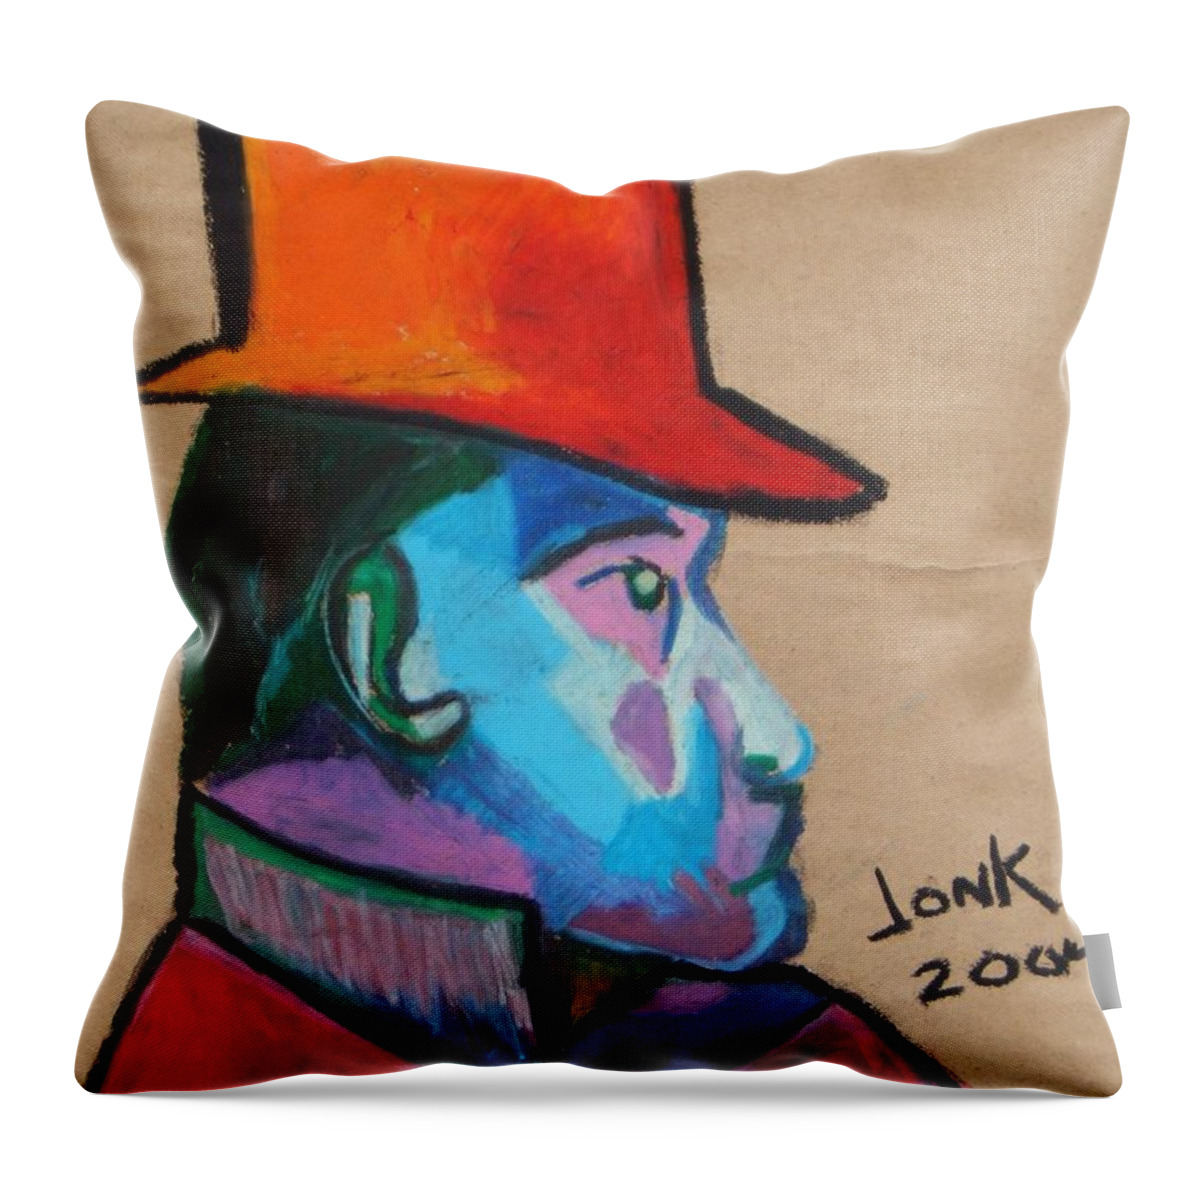 Abstract Portrait Throw Pillow featuring the drawing Man with Top Hat by Jon Kittleson